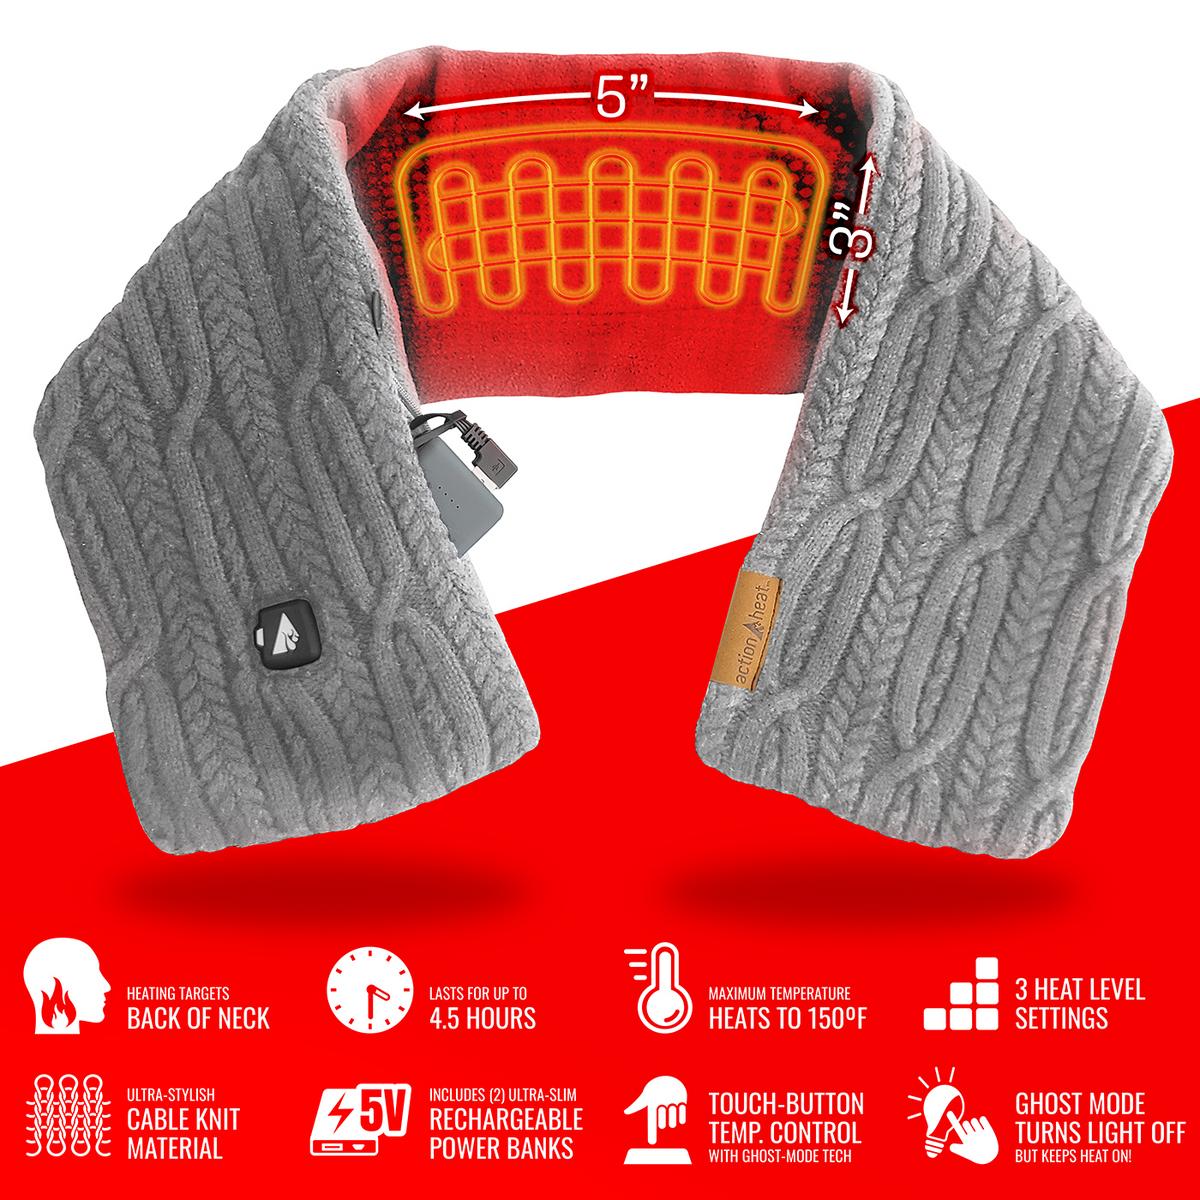 ActionHeat 7V Battery Heated Cable Knit Wrap Scarf - Battery